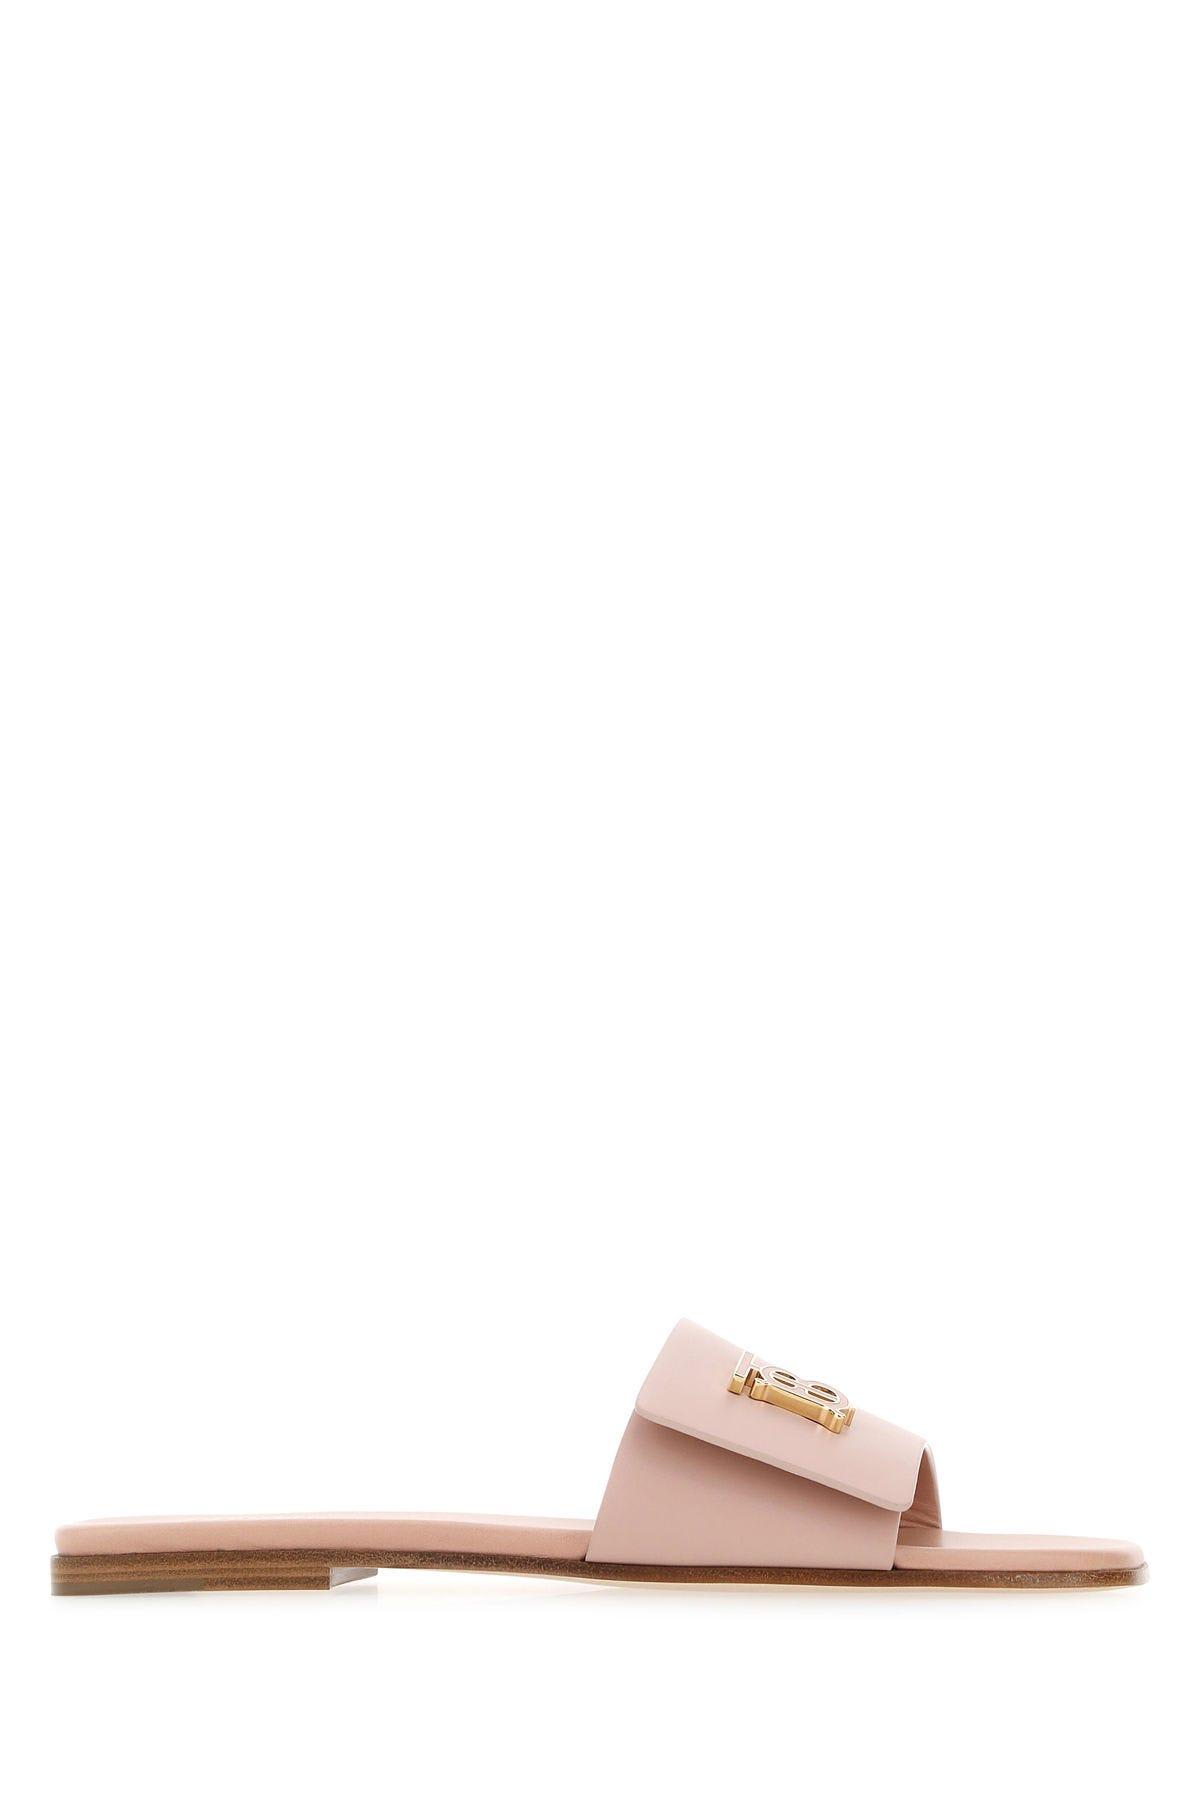 BURBERRY POWDER PINK LEATHER SLIPPERS